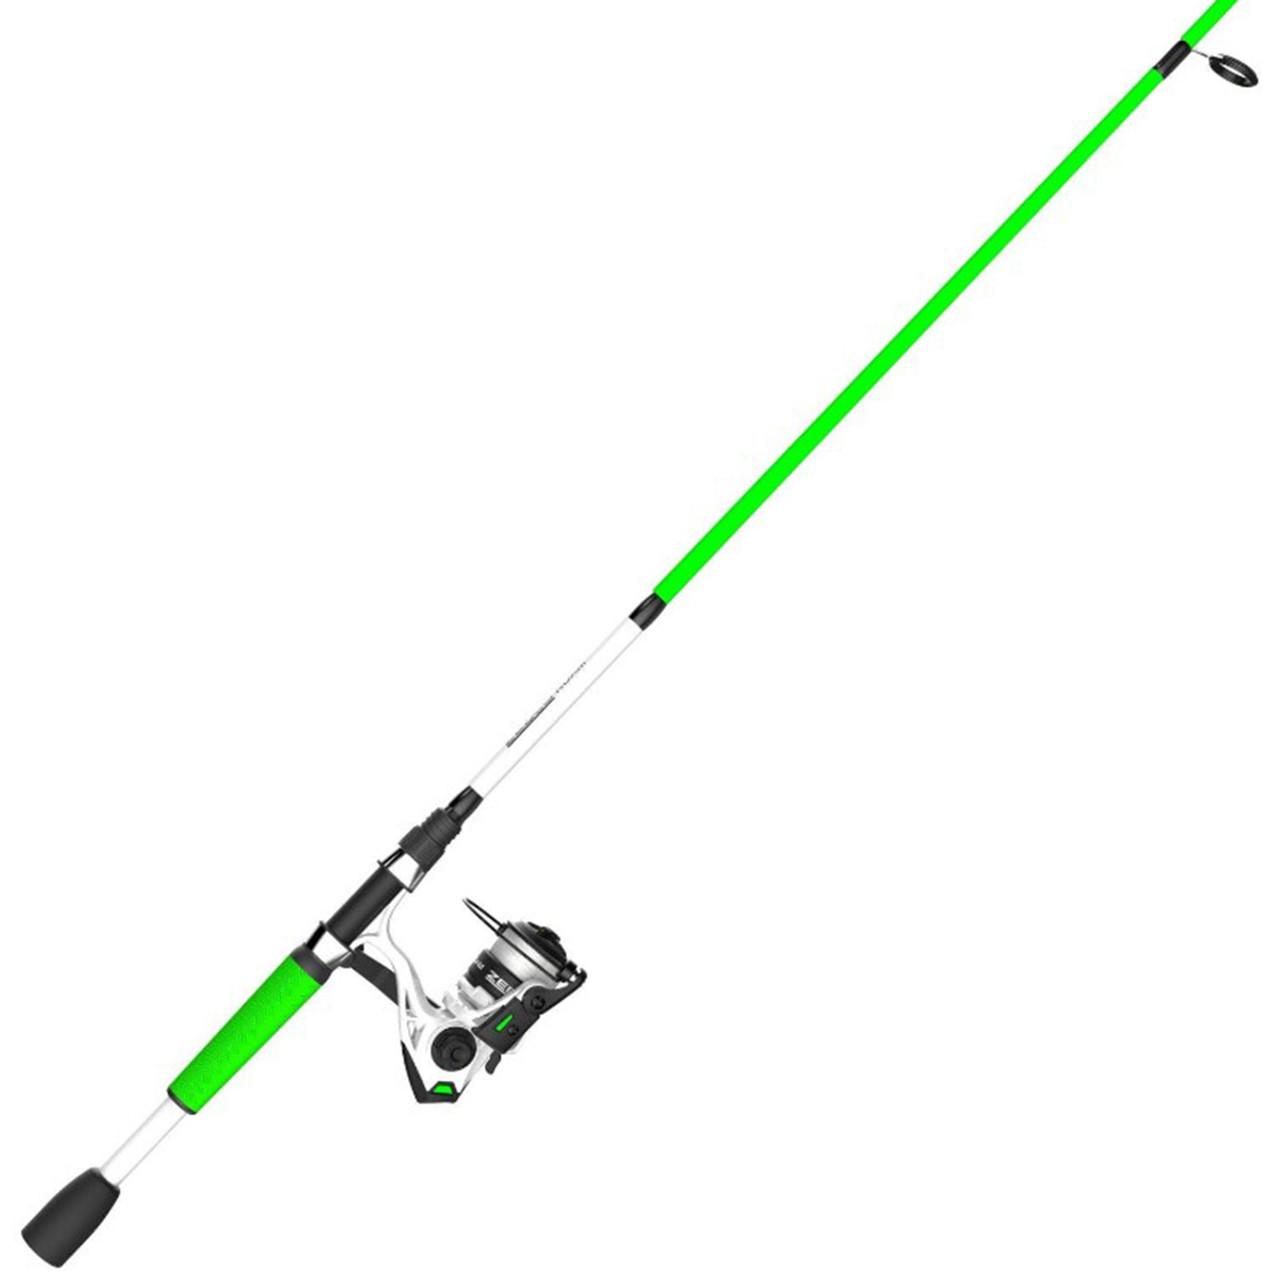 Zebco Spincast Combo 5 ft 6 in Item Fishing Rod & Reel Combos for